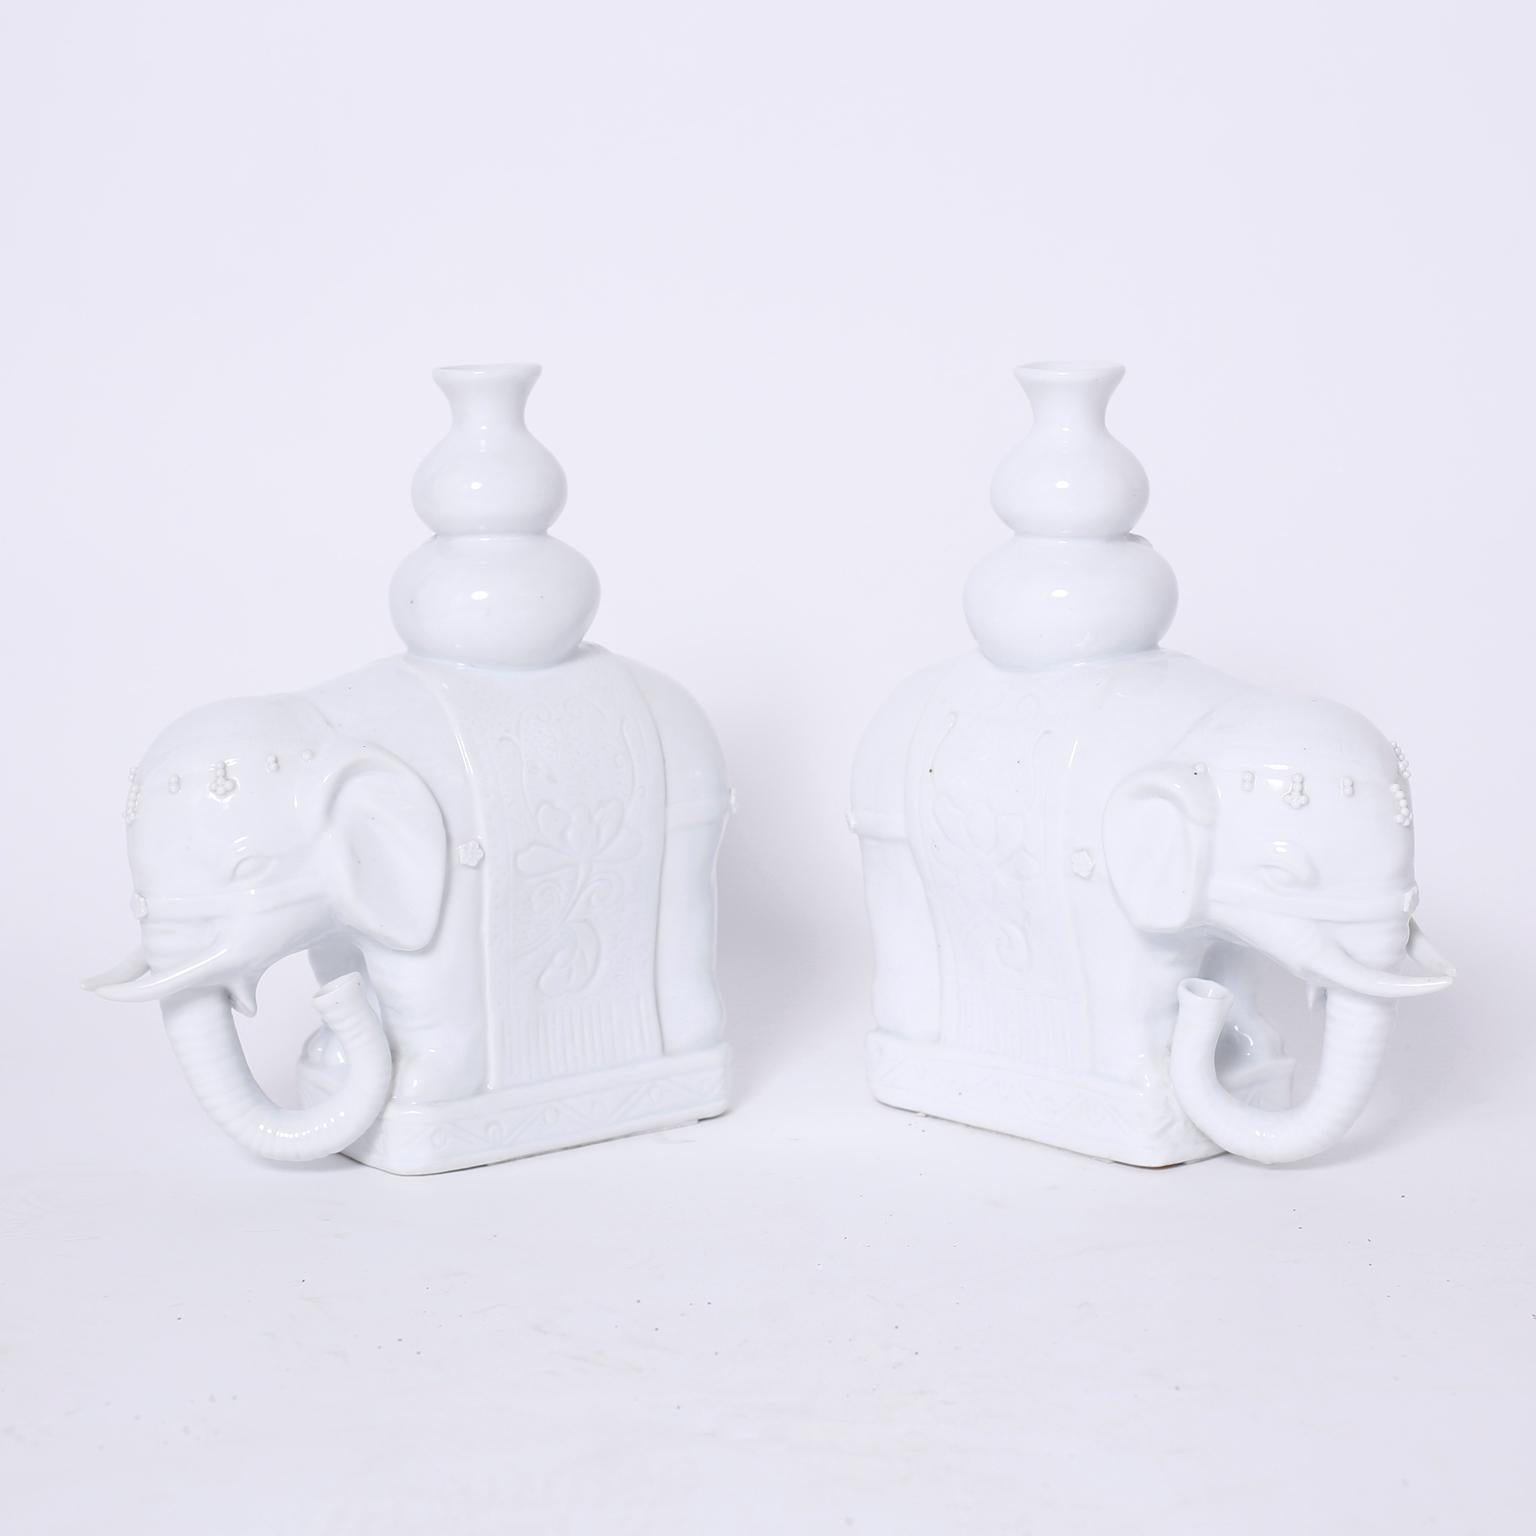 Intriguing pair of midcentury Chinese porcelain elephants with a white glaze carrying vases or vessels. Signed Maitland-Smith on the bottom.